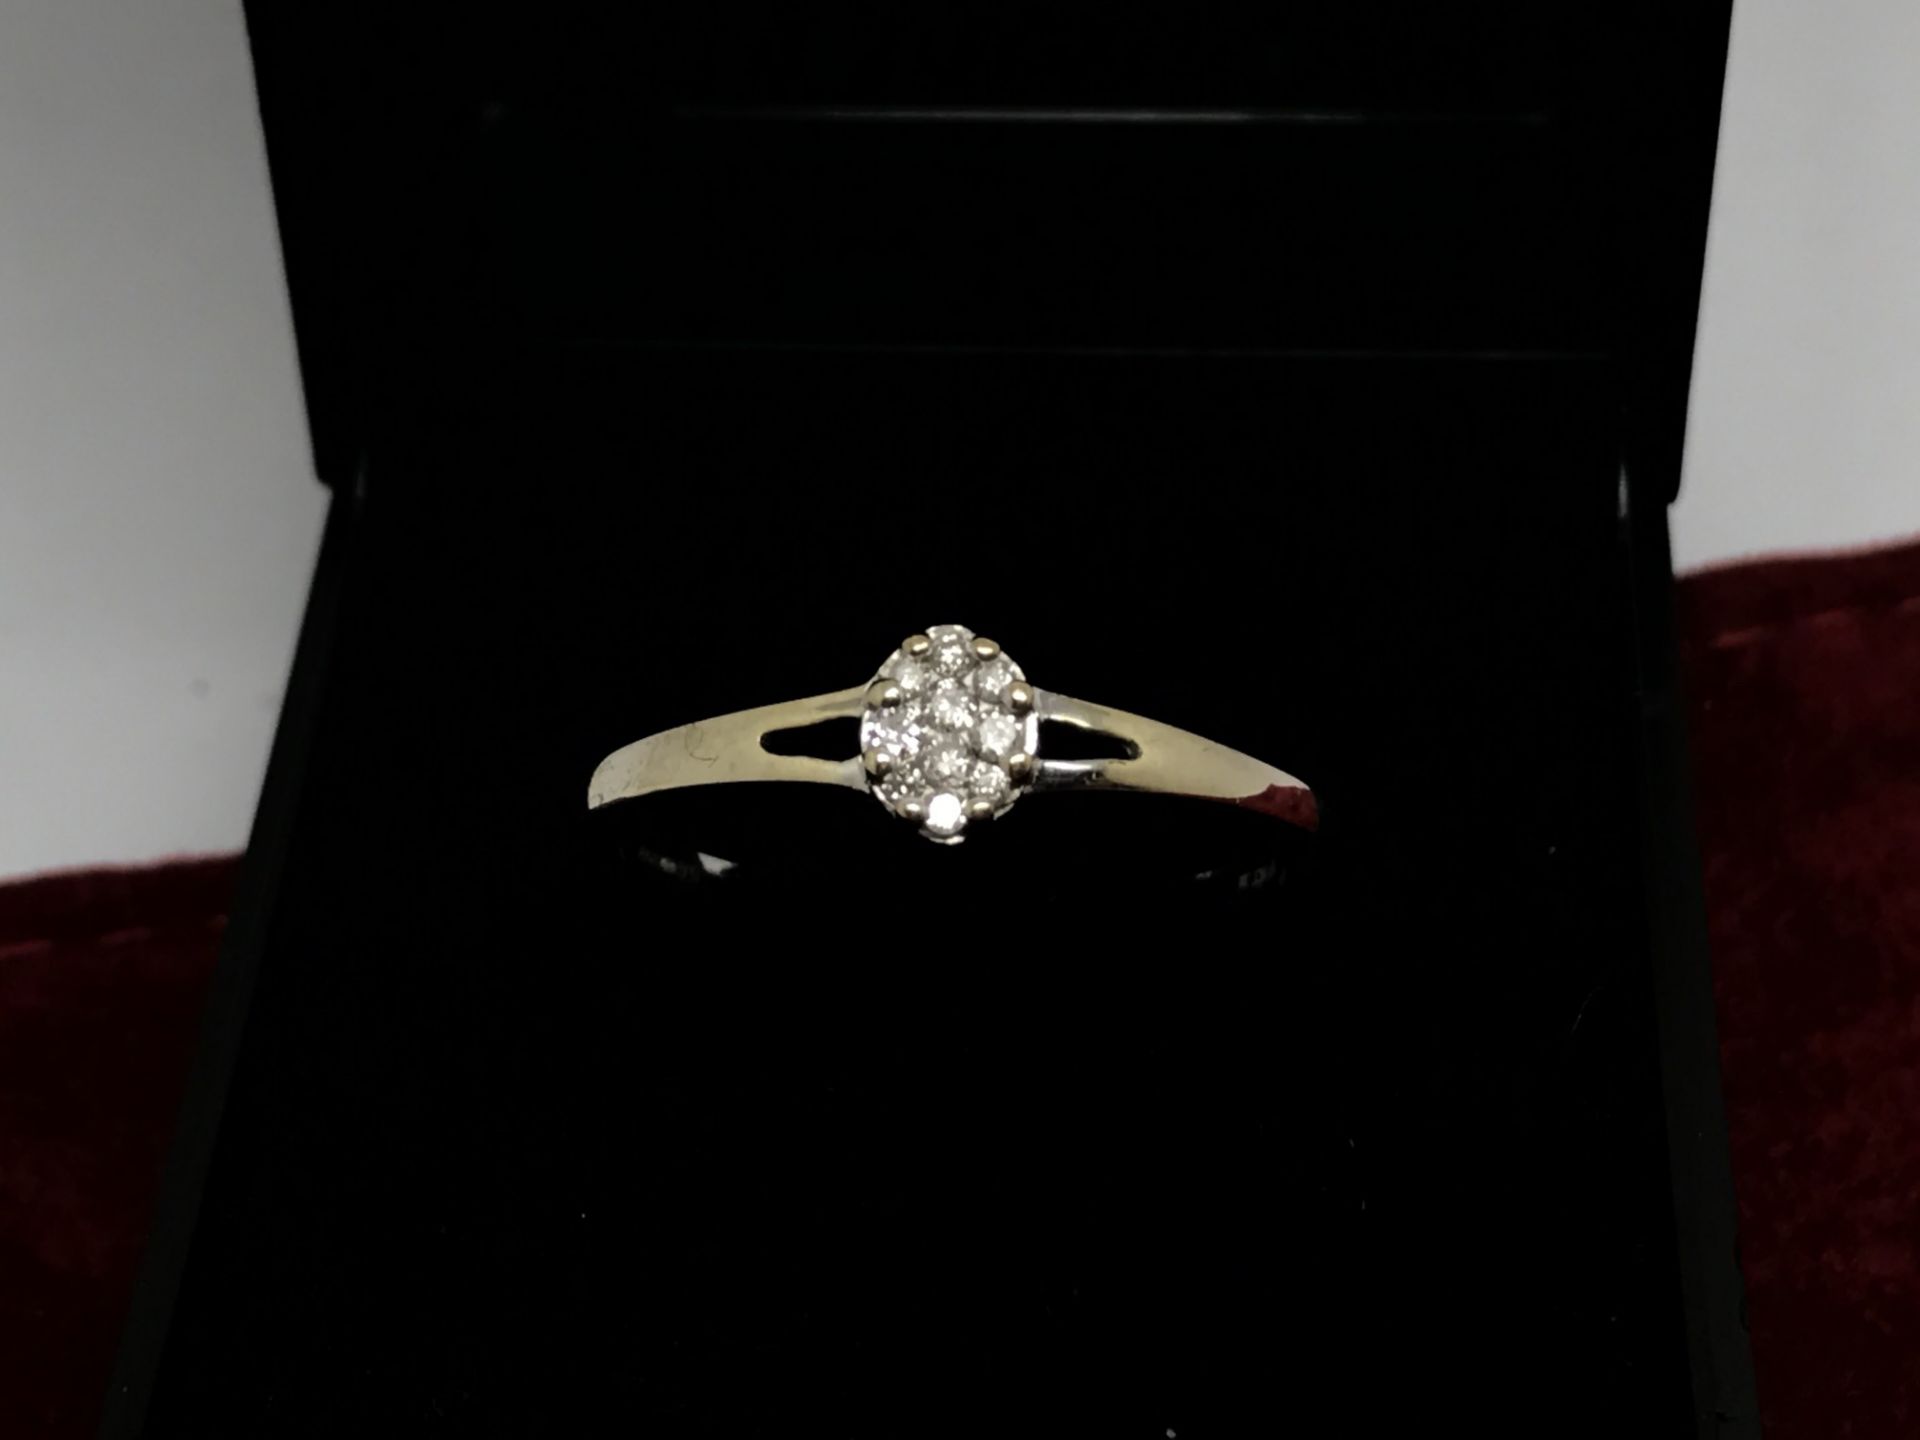 9ct GOLD DIAMOND RING - MARKED 9KT - TESTED FOR 9CT GOLD